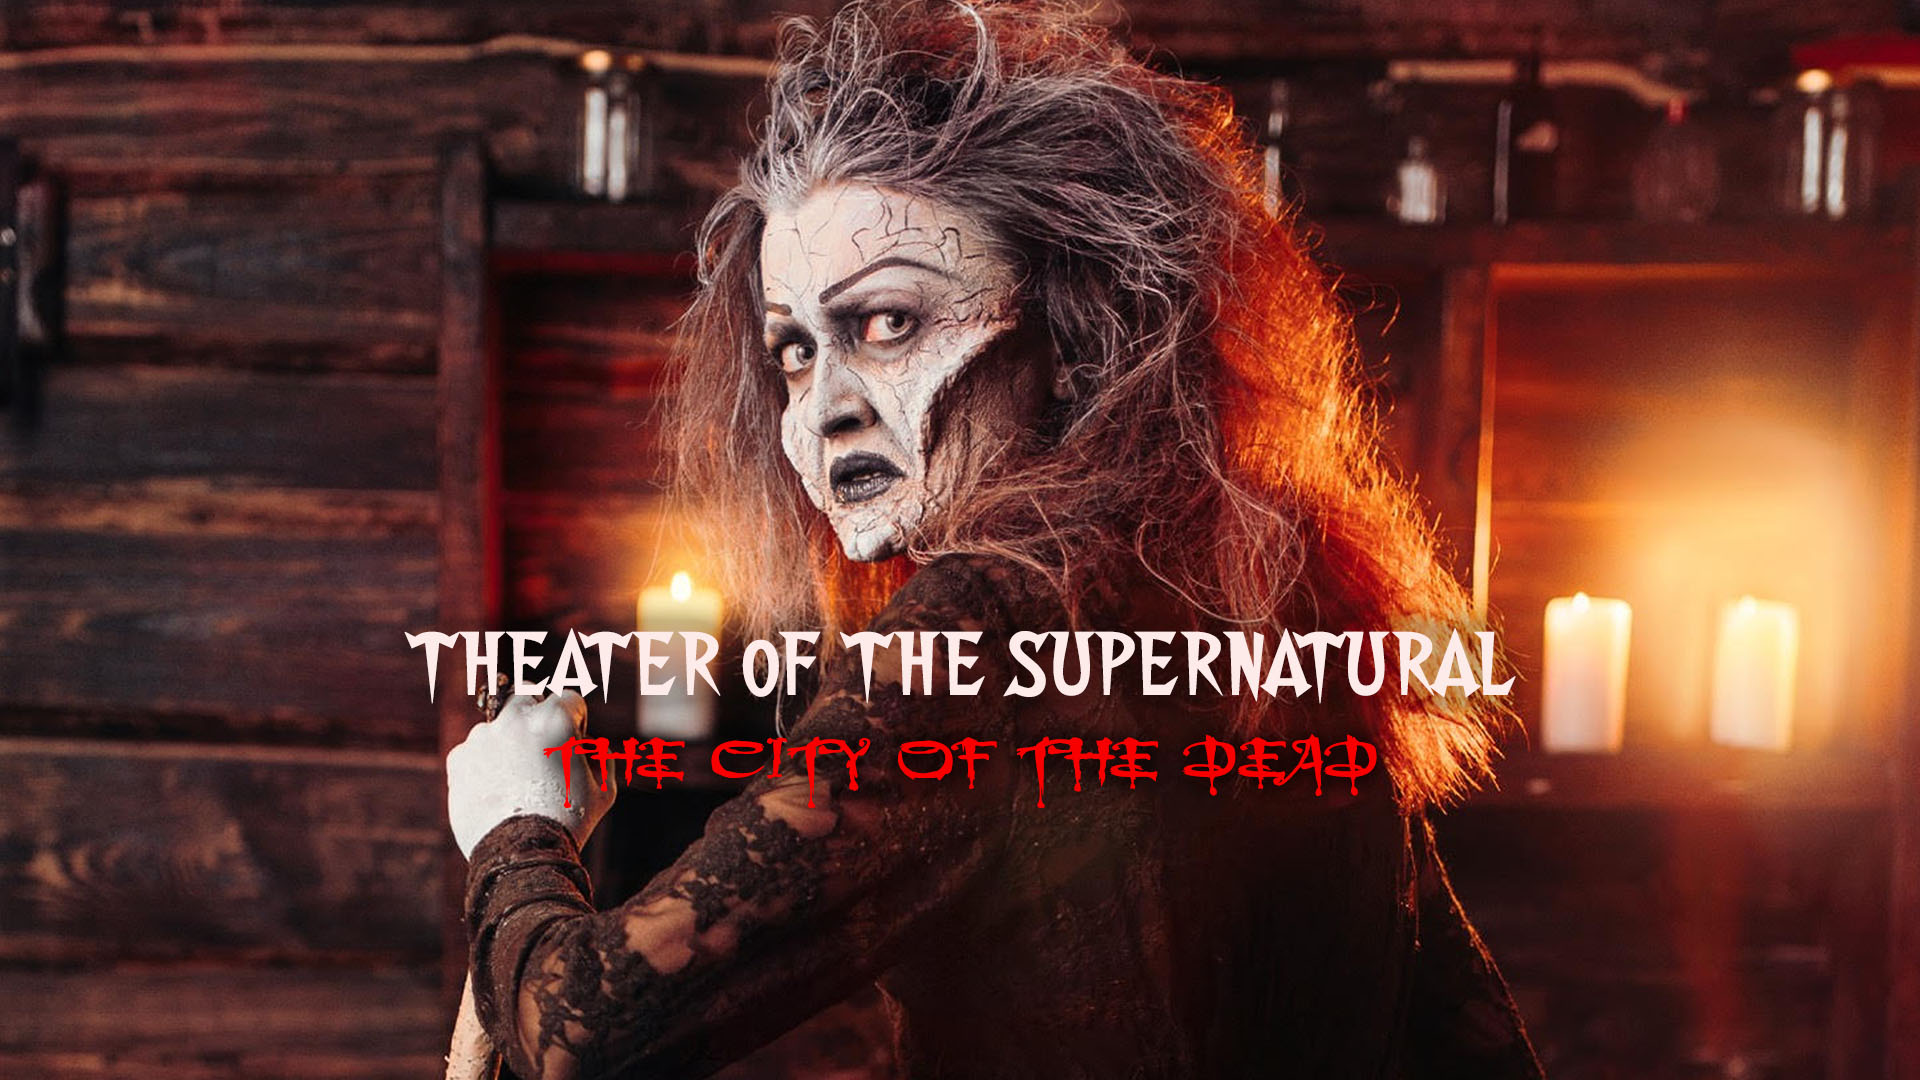 Theater of the Supernatural: The City of the Dead